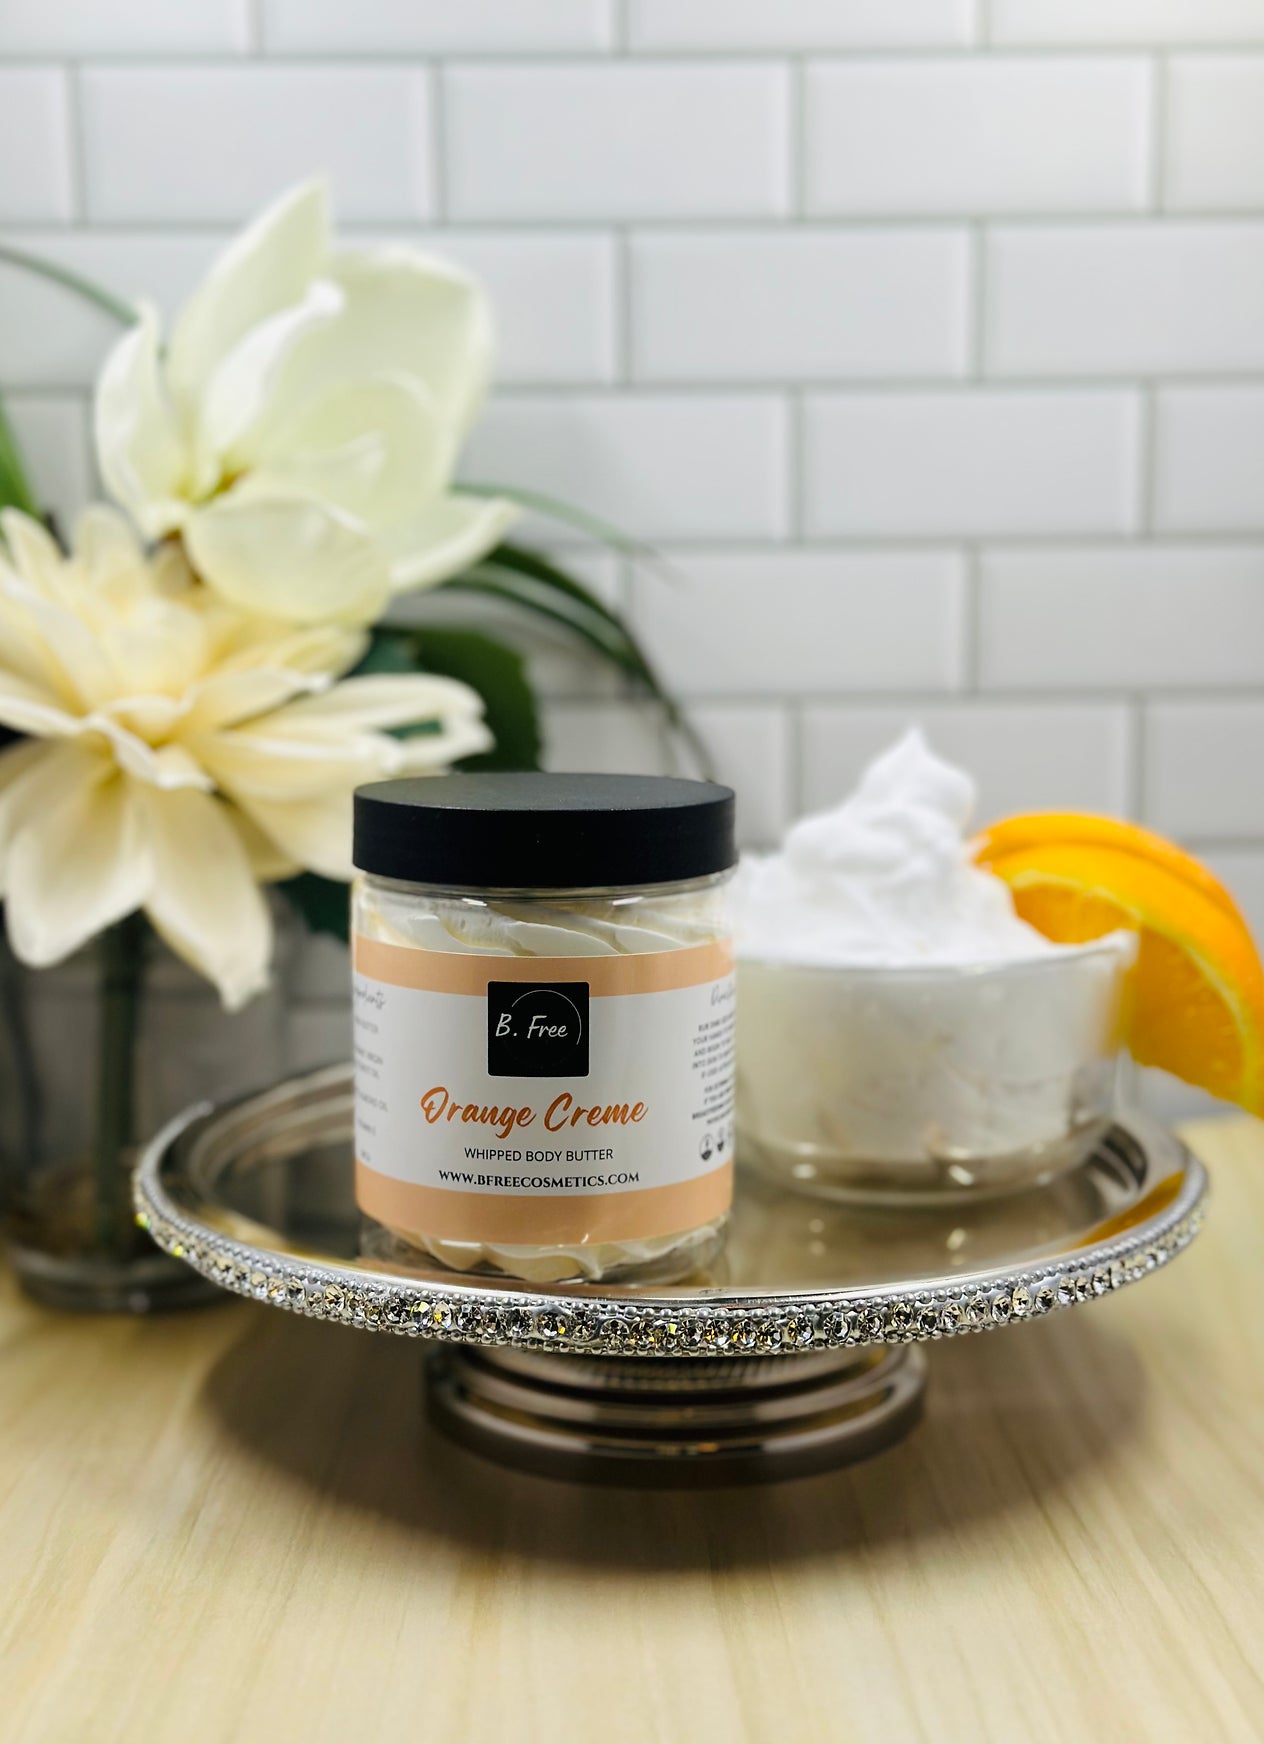 Orange Creme Whipped Body Butter